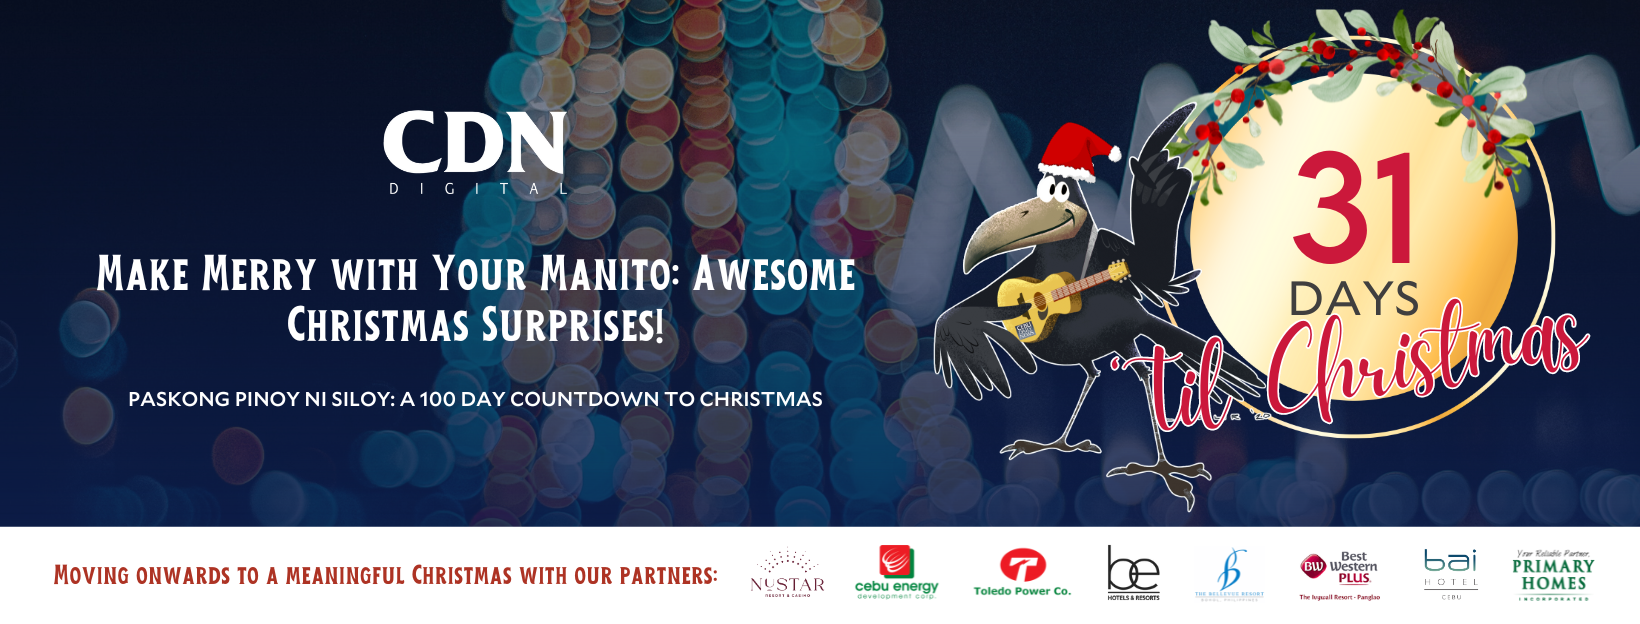 Make Merry with Your Manito: Awesome Christmas Surprises!